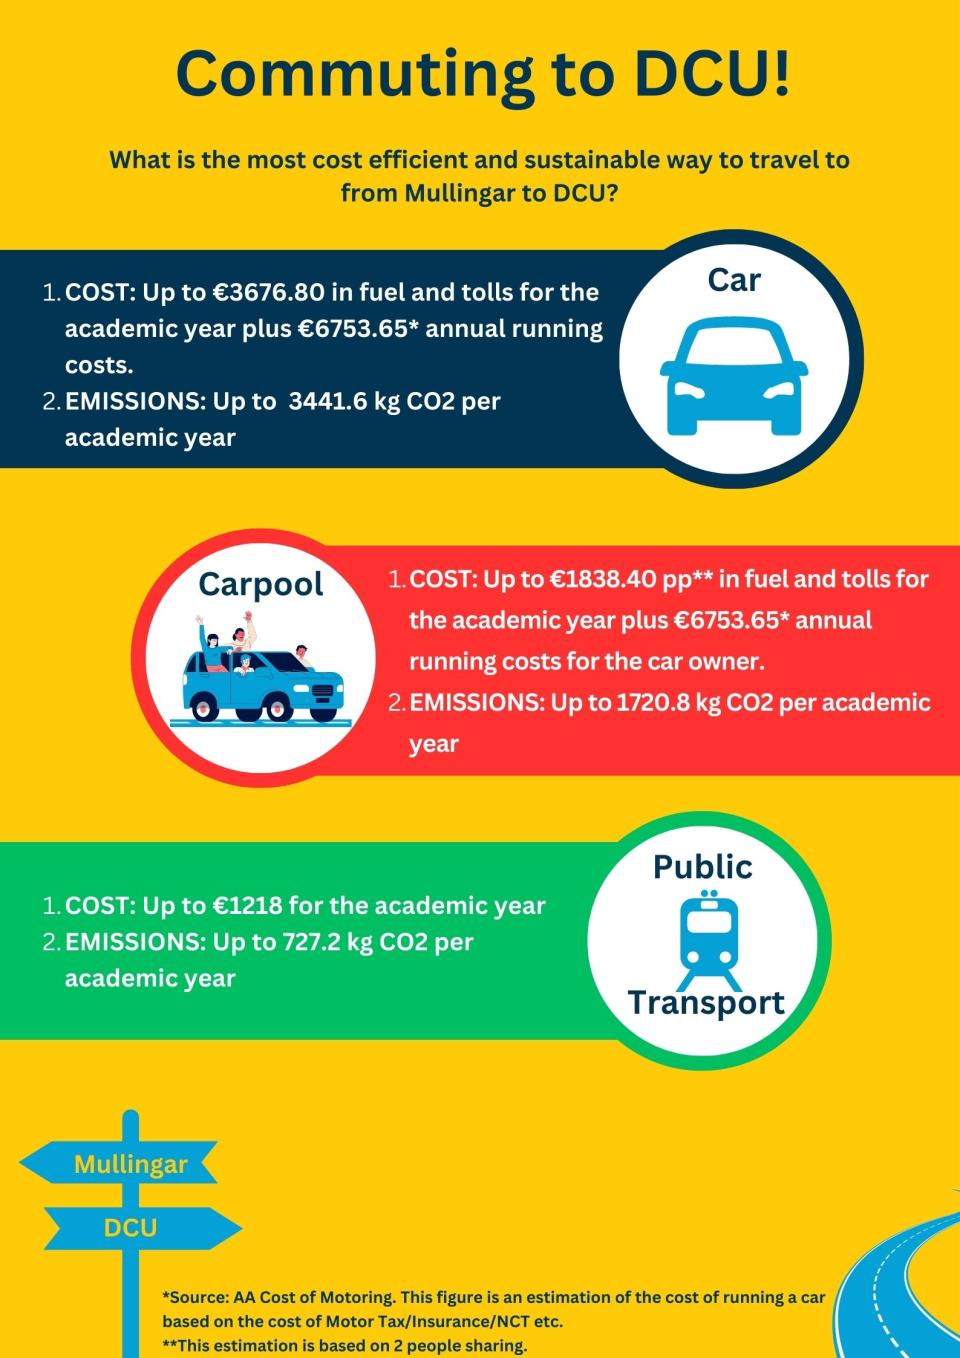 Comparison of cost and emissions associated with travelling to DCU throughout academic year via different transport modes. Car - €3676.80 in fuel and tolls, 3441.6kg CO2 in emissions. Carpool - €1838.40 per person in fuel and tolls, 1720.8kg CO2 in emissions.  Public Transport - €1218 in fares, 727.2kg CO2 in emissions. 